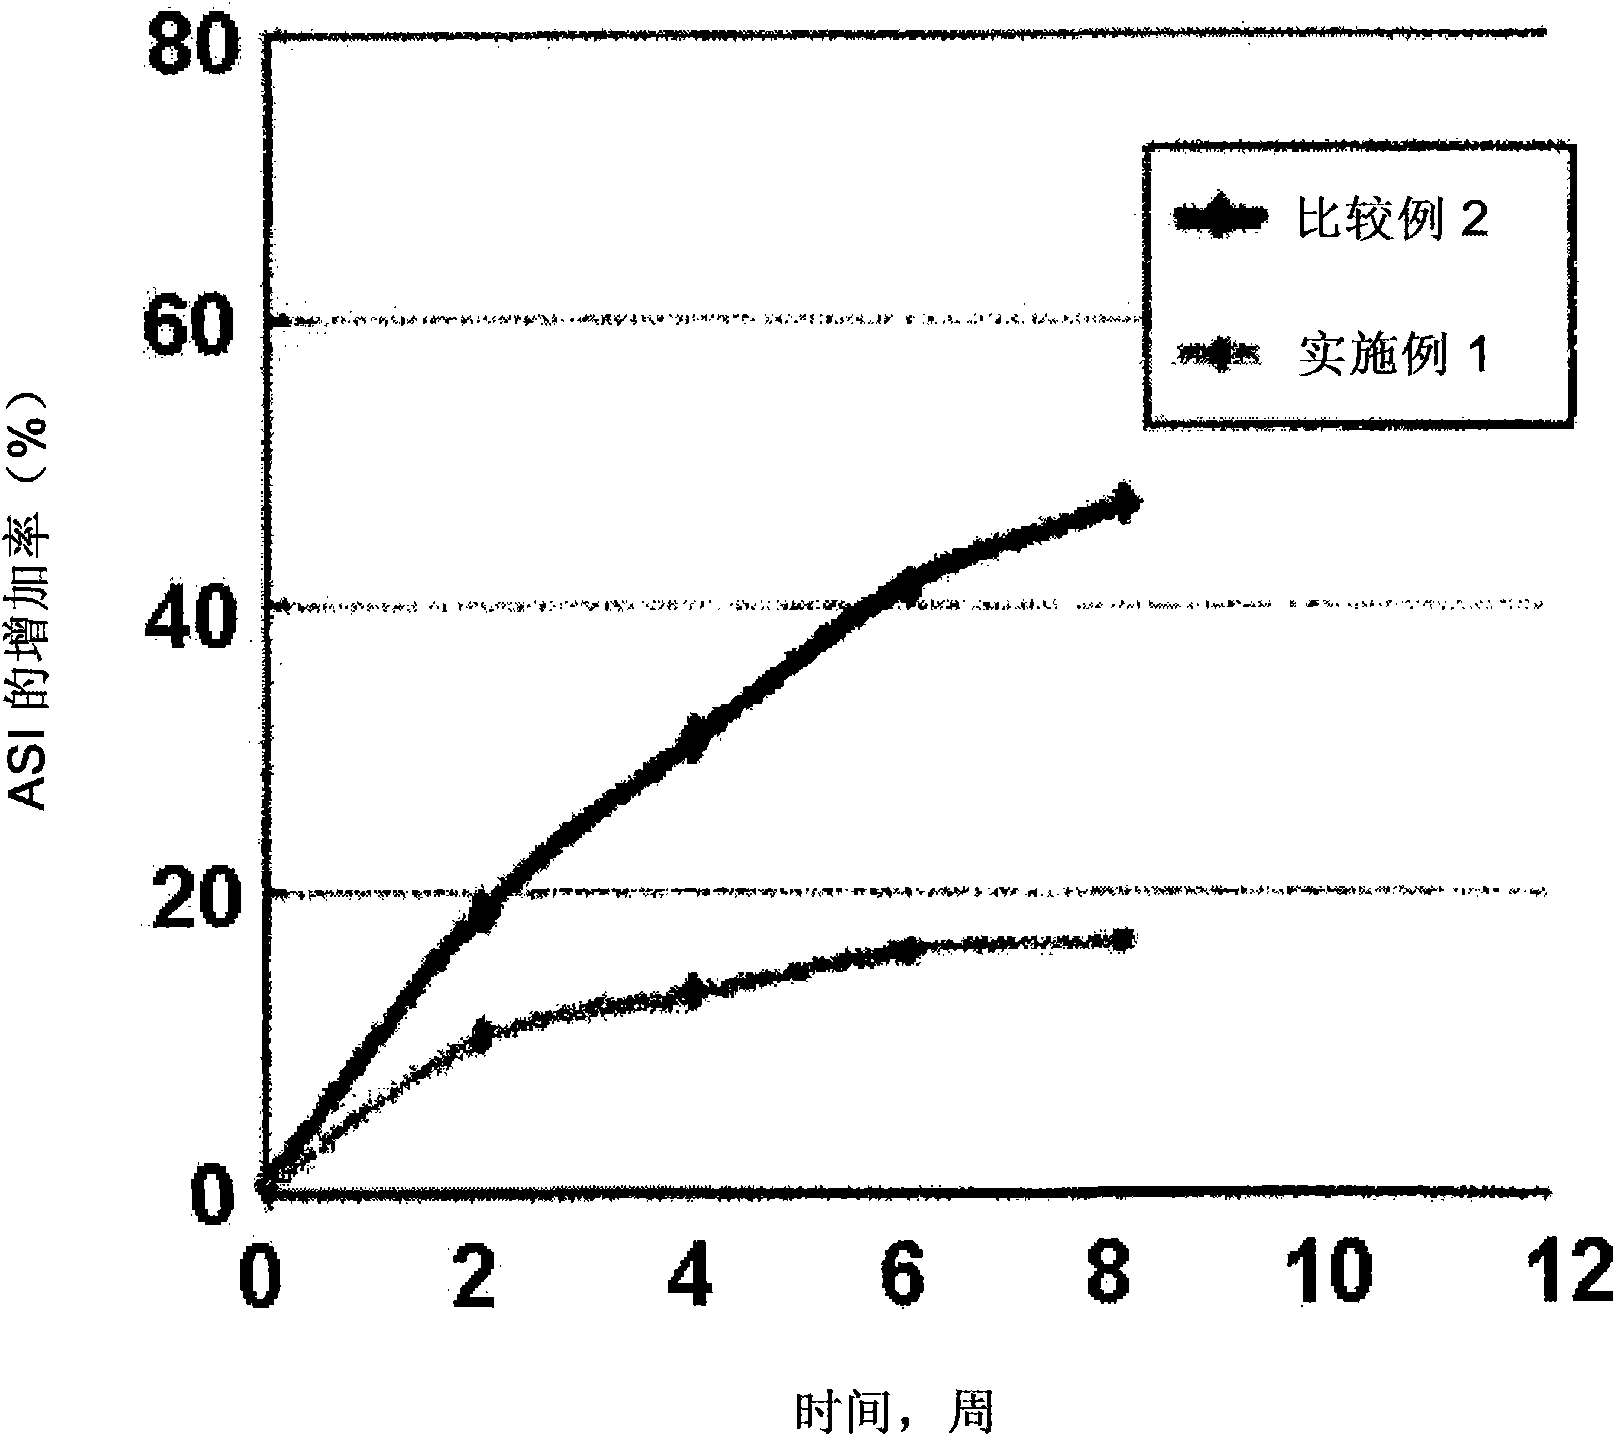 Fabrication of lithium secondary battery